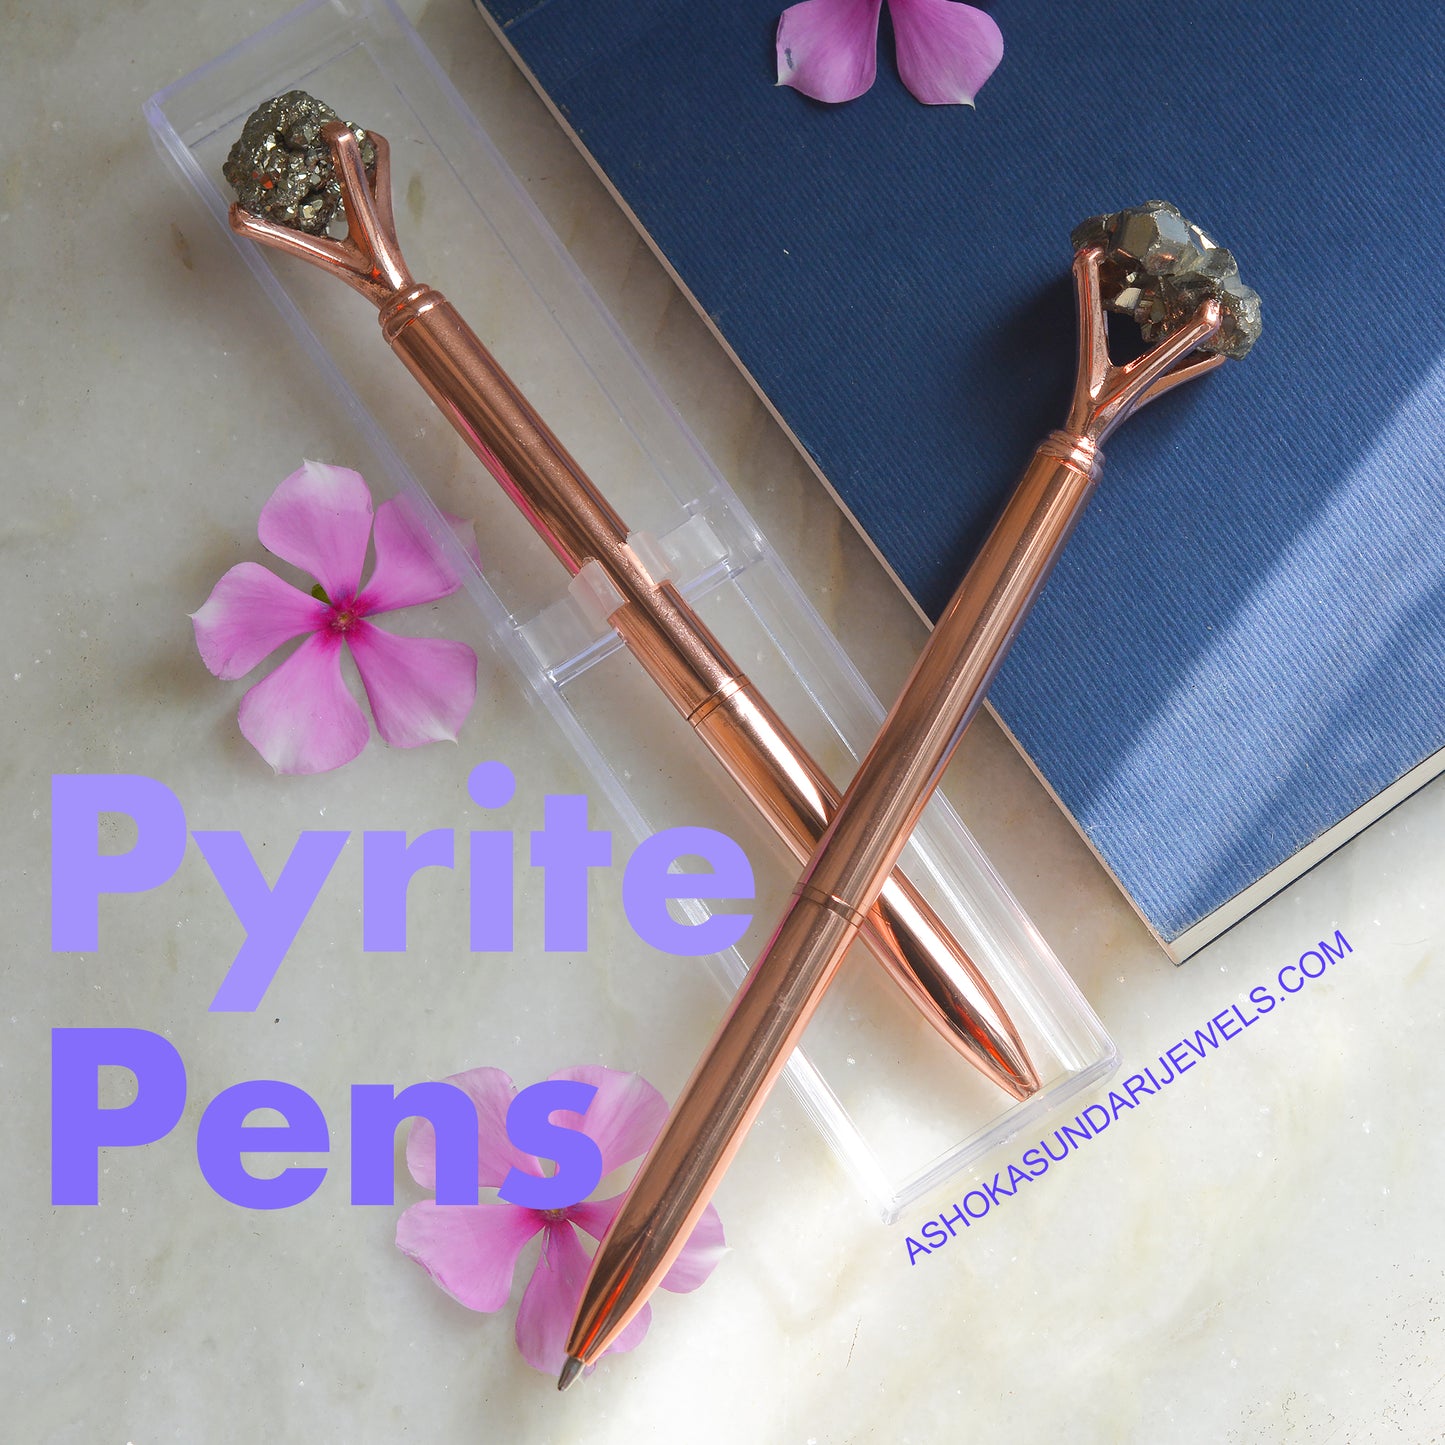 Pyrite Crystal Pen - PACK OF 2 Couples and Friends Pack